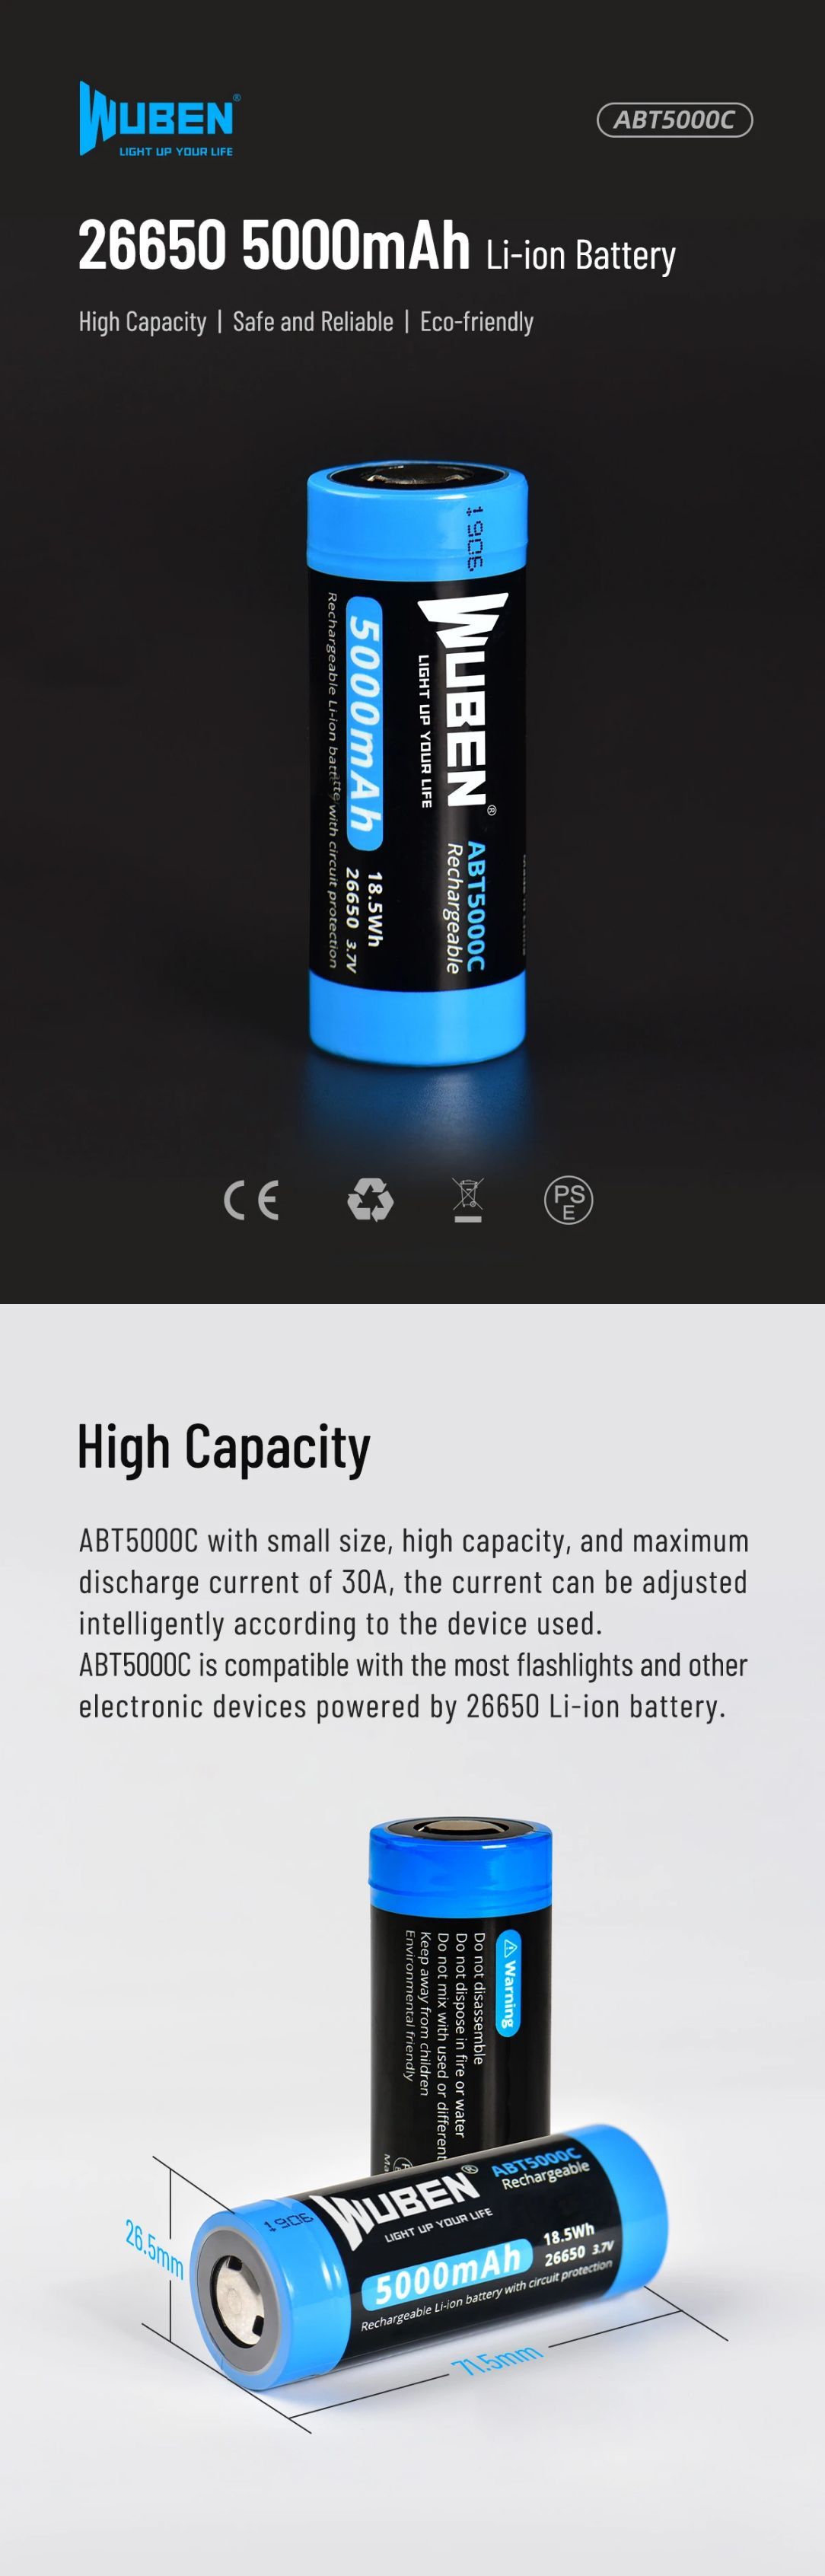 WUBEN-ABT5000C-26650-5000mAh-Rechargeable-Protected-Lithium-Battery-Large-Capacity-Li-ion-Battery-Fo-1730173